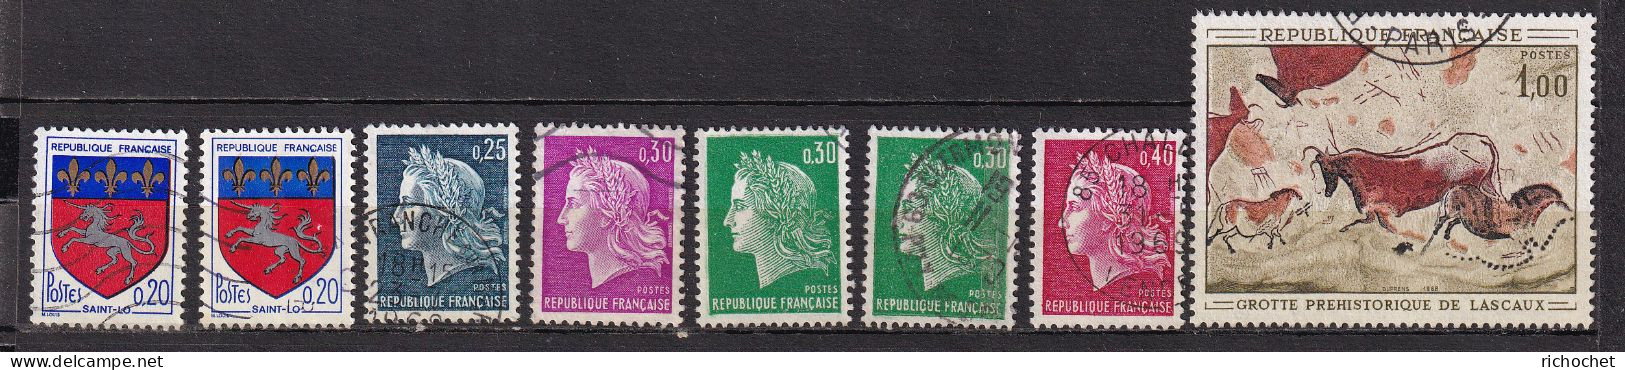 France 1510 + 1510c + 1535 + 1536 + 1536 A + 1536 B + 1555 + 1611 B ° - Used Stamps